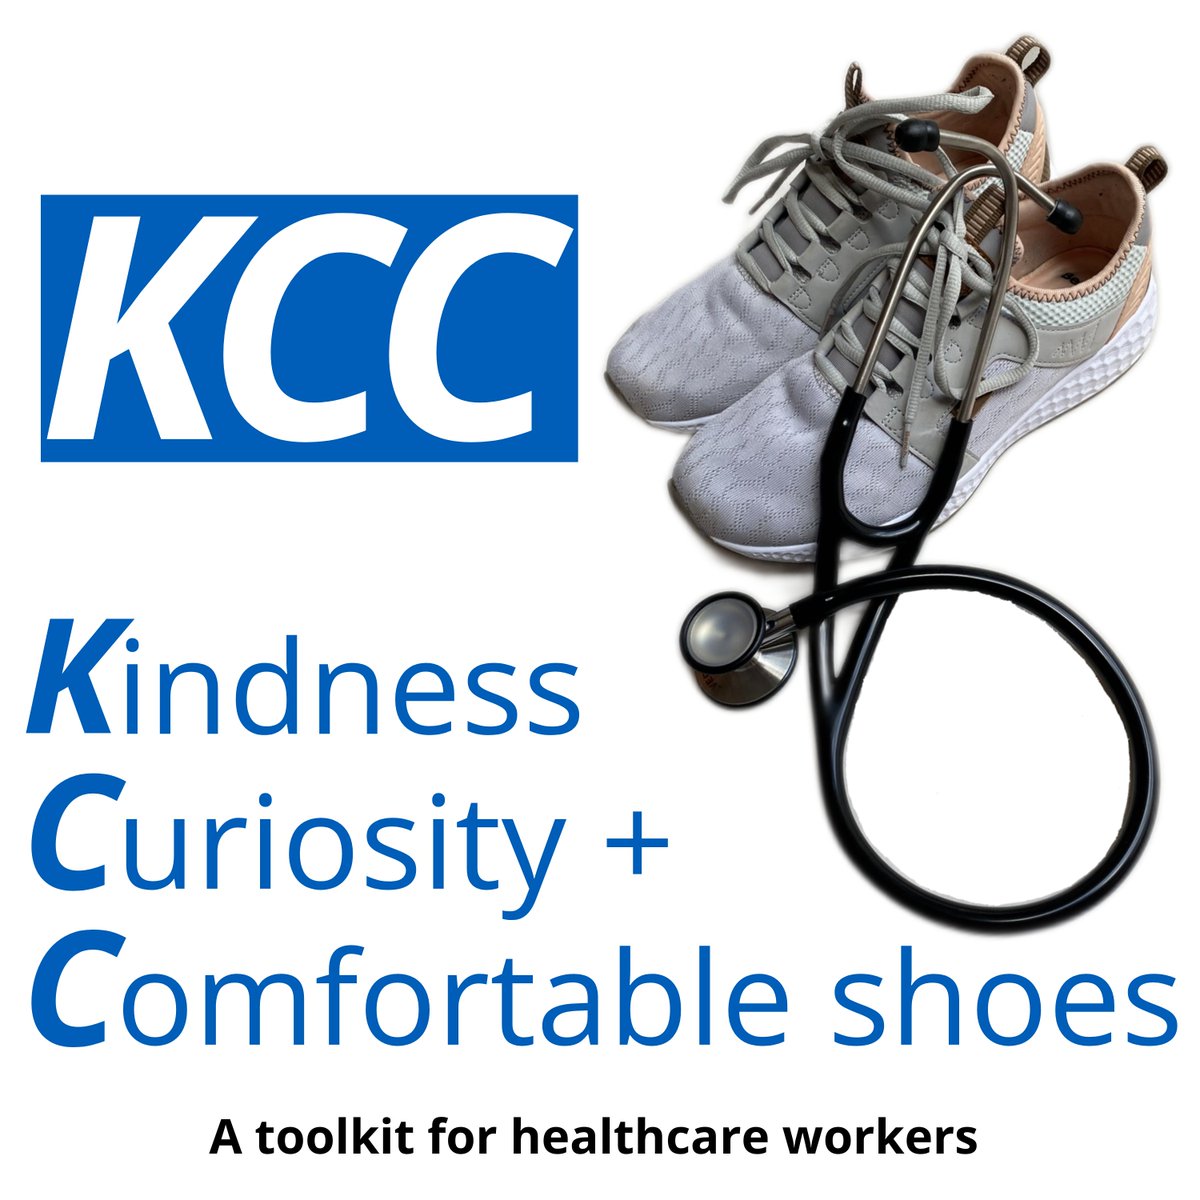 The toolkit for healthcare workers across the world. (Listeners in 15 countries across 5 continents!) #Kindness #Curiosity #ComfortableShoes Listen now wherever you get your podcasts